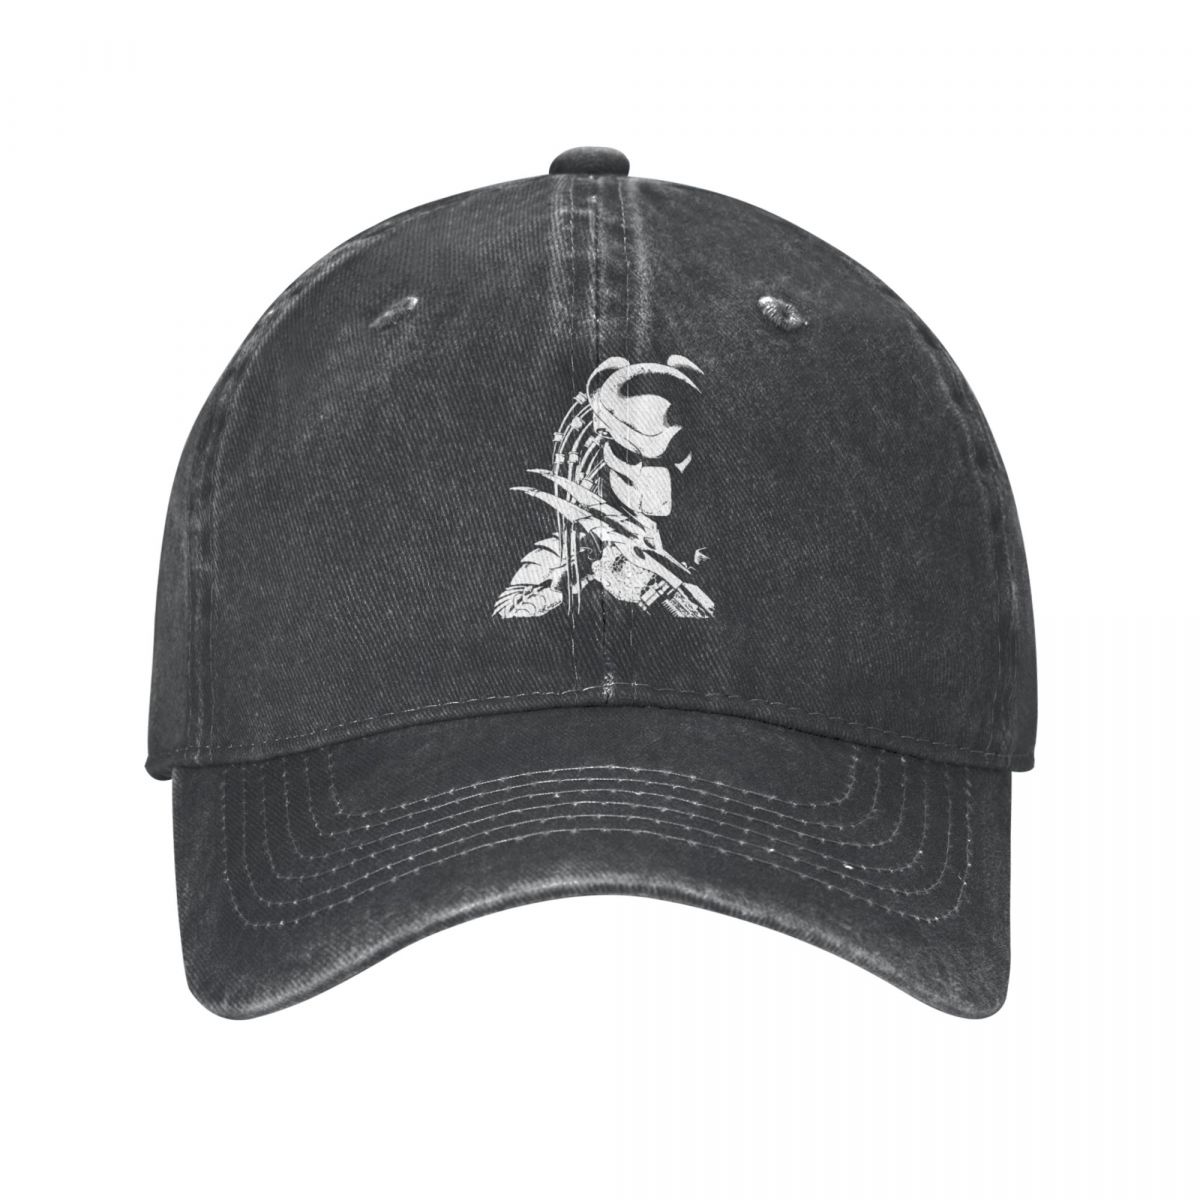 Predator - You Know It's Going Down - Snapback Baseball Cap - Summer Hat For Men and Women-